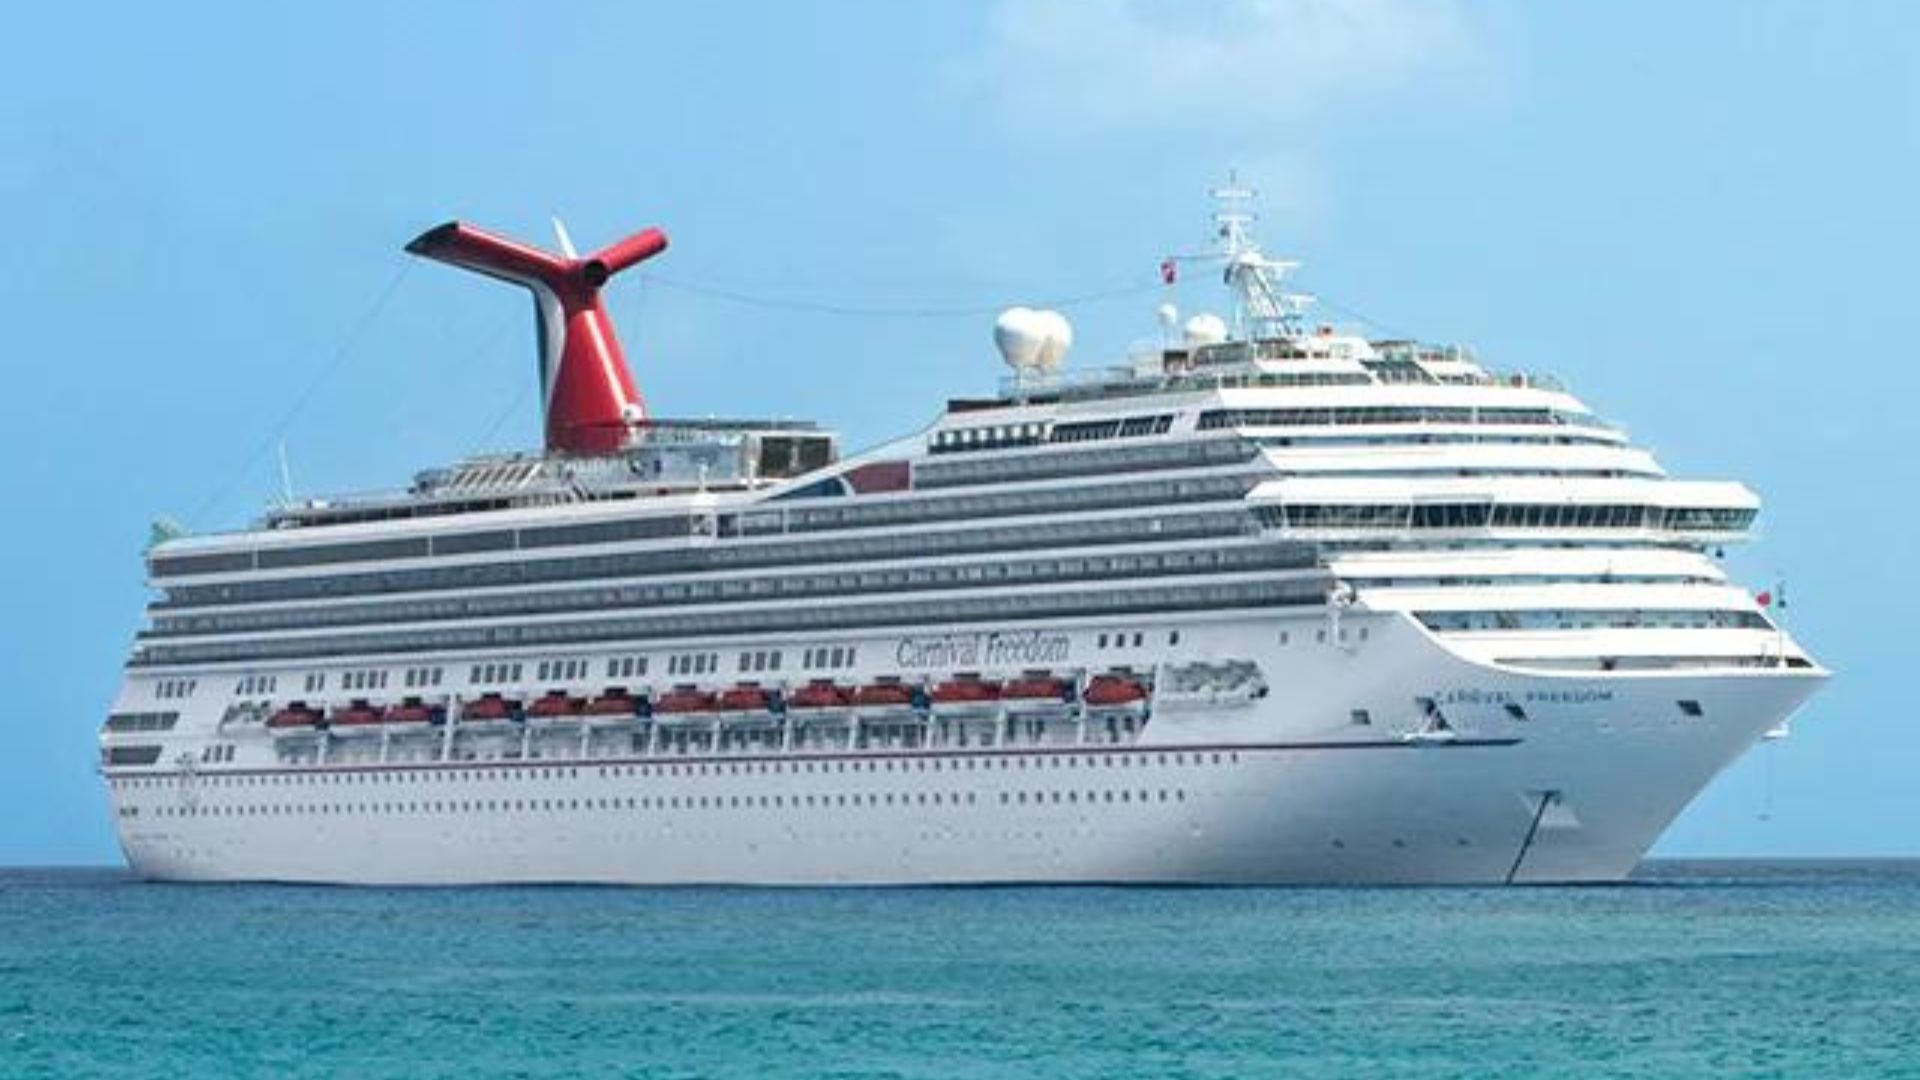 Carnival cruise ship passengers gripe of the big number of Covid-19 cases